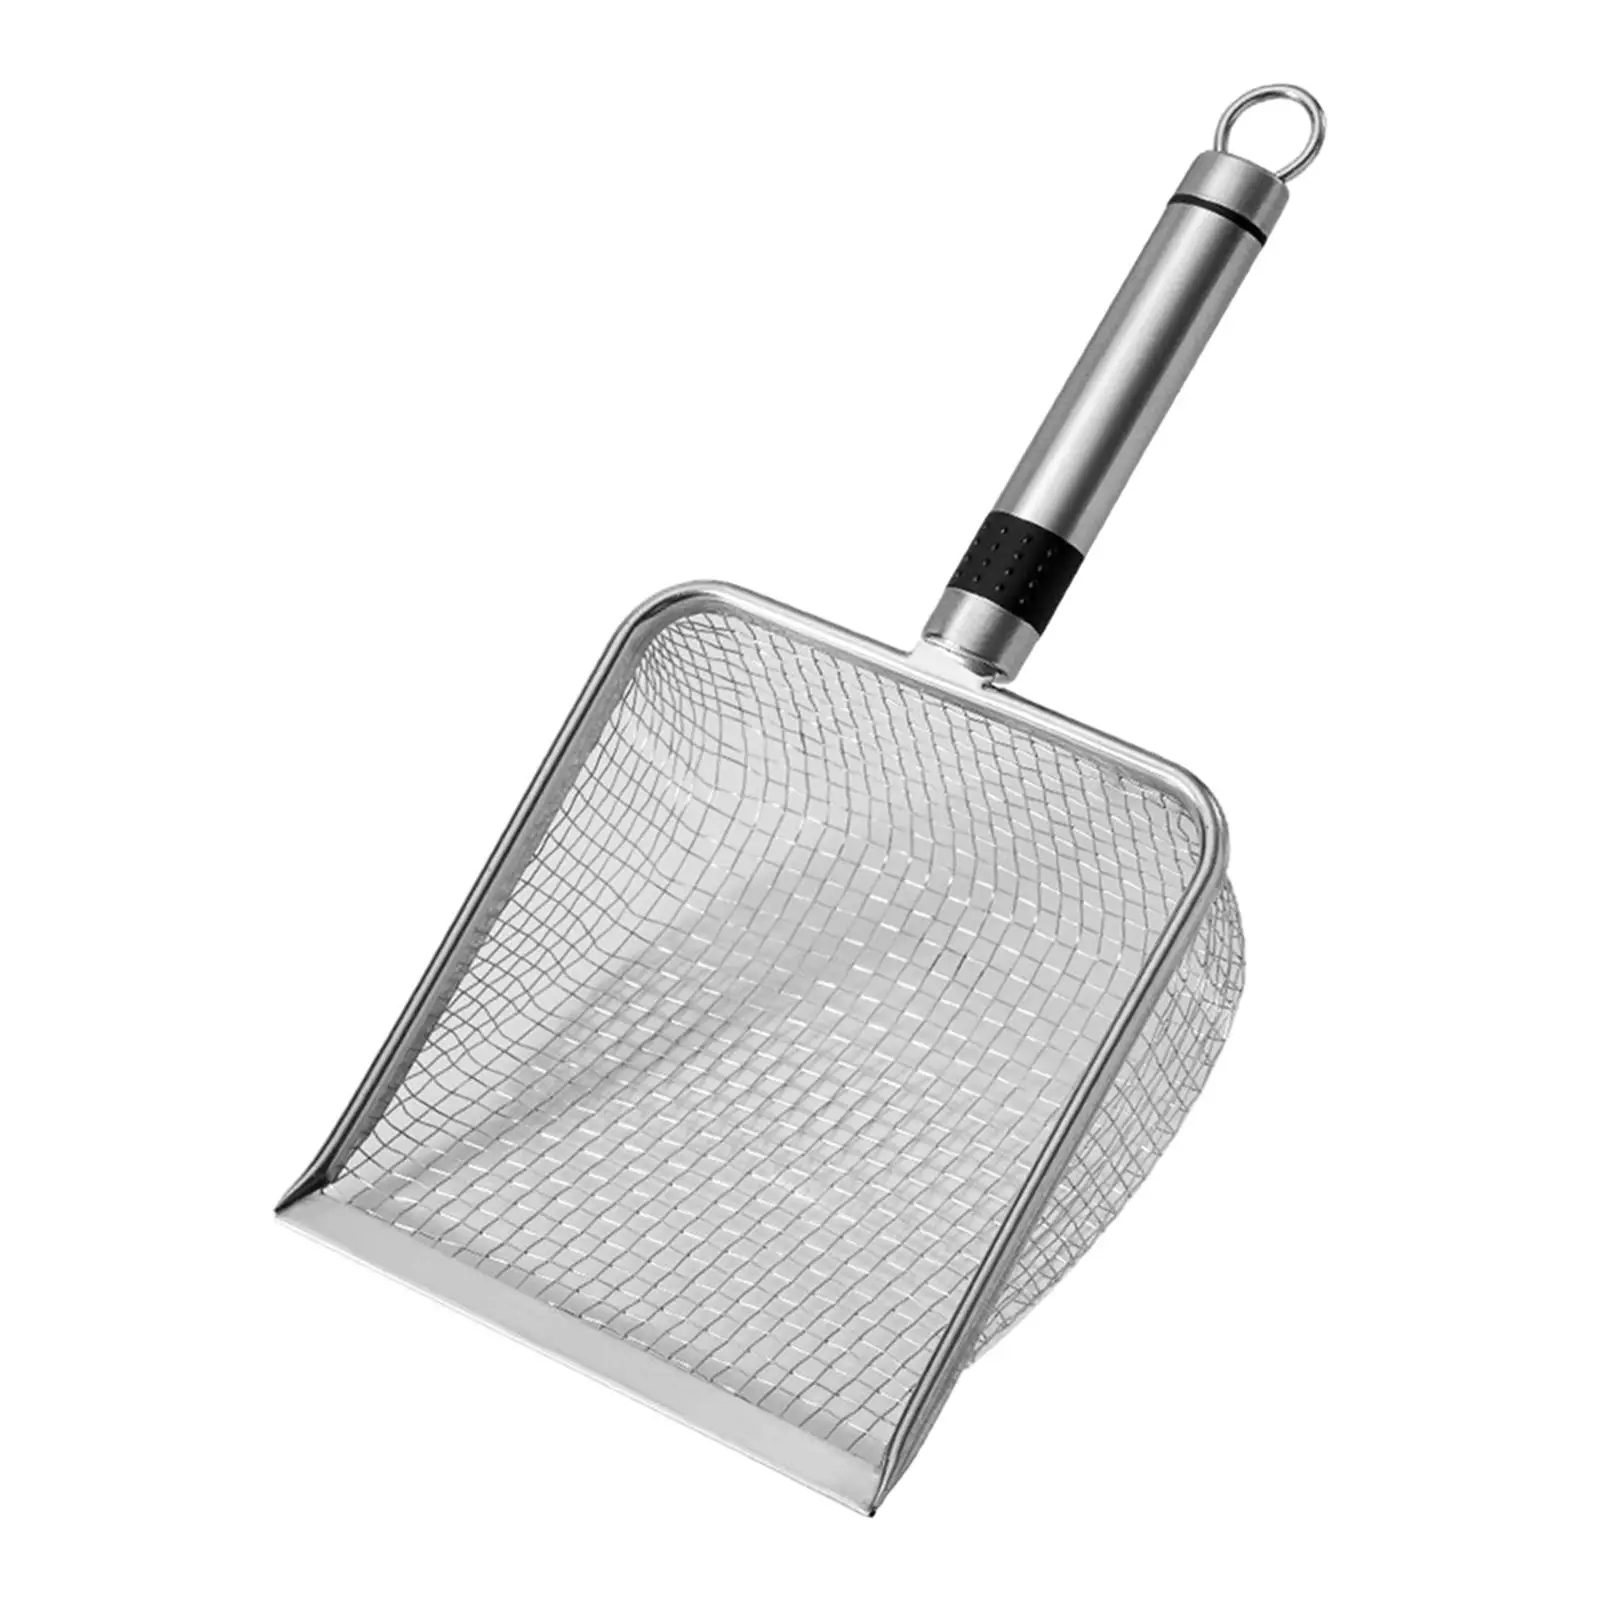 Cats Litter Scooper Pets Sifter Shovels Fast Sifting Cleaning Tool Reptile Sand Shovels with Metal Handle Litter Boxes,